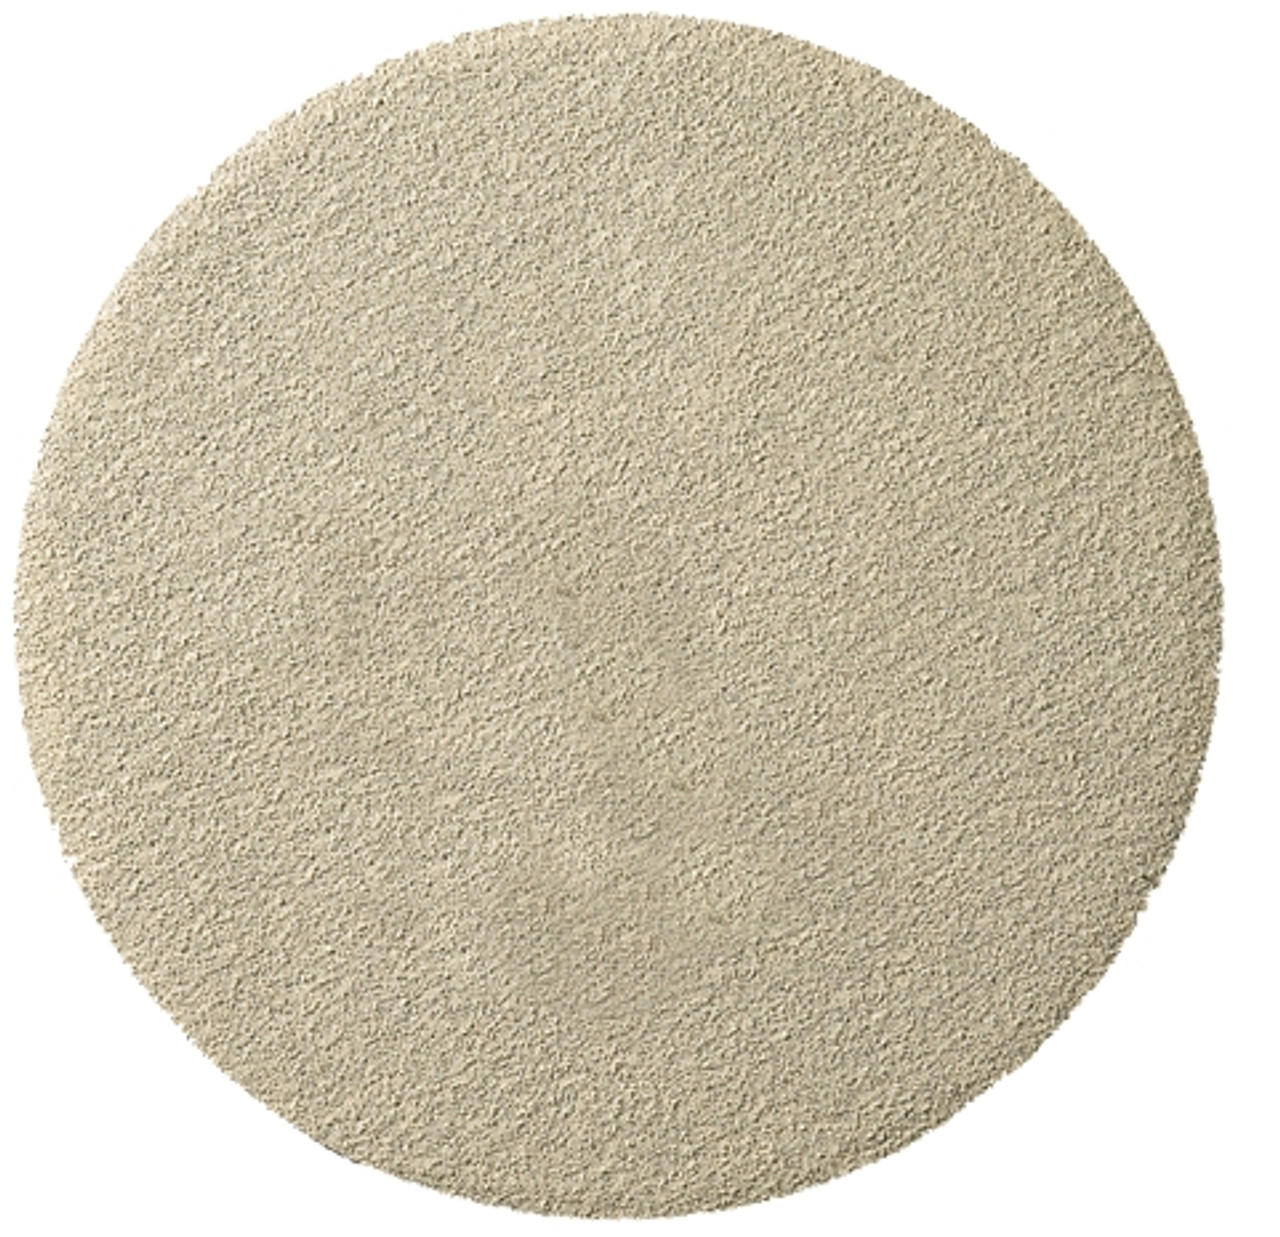 Self Fastening Disc - (Ps33) Paper/Aluminium Oxide/No Hole 120Grit 125Mm